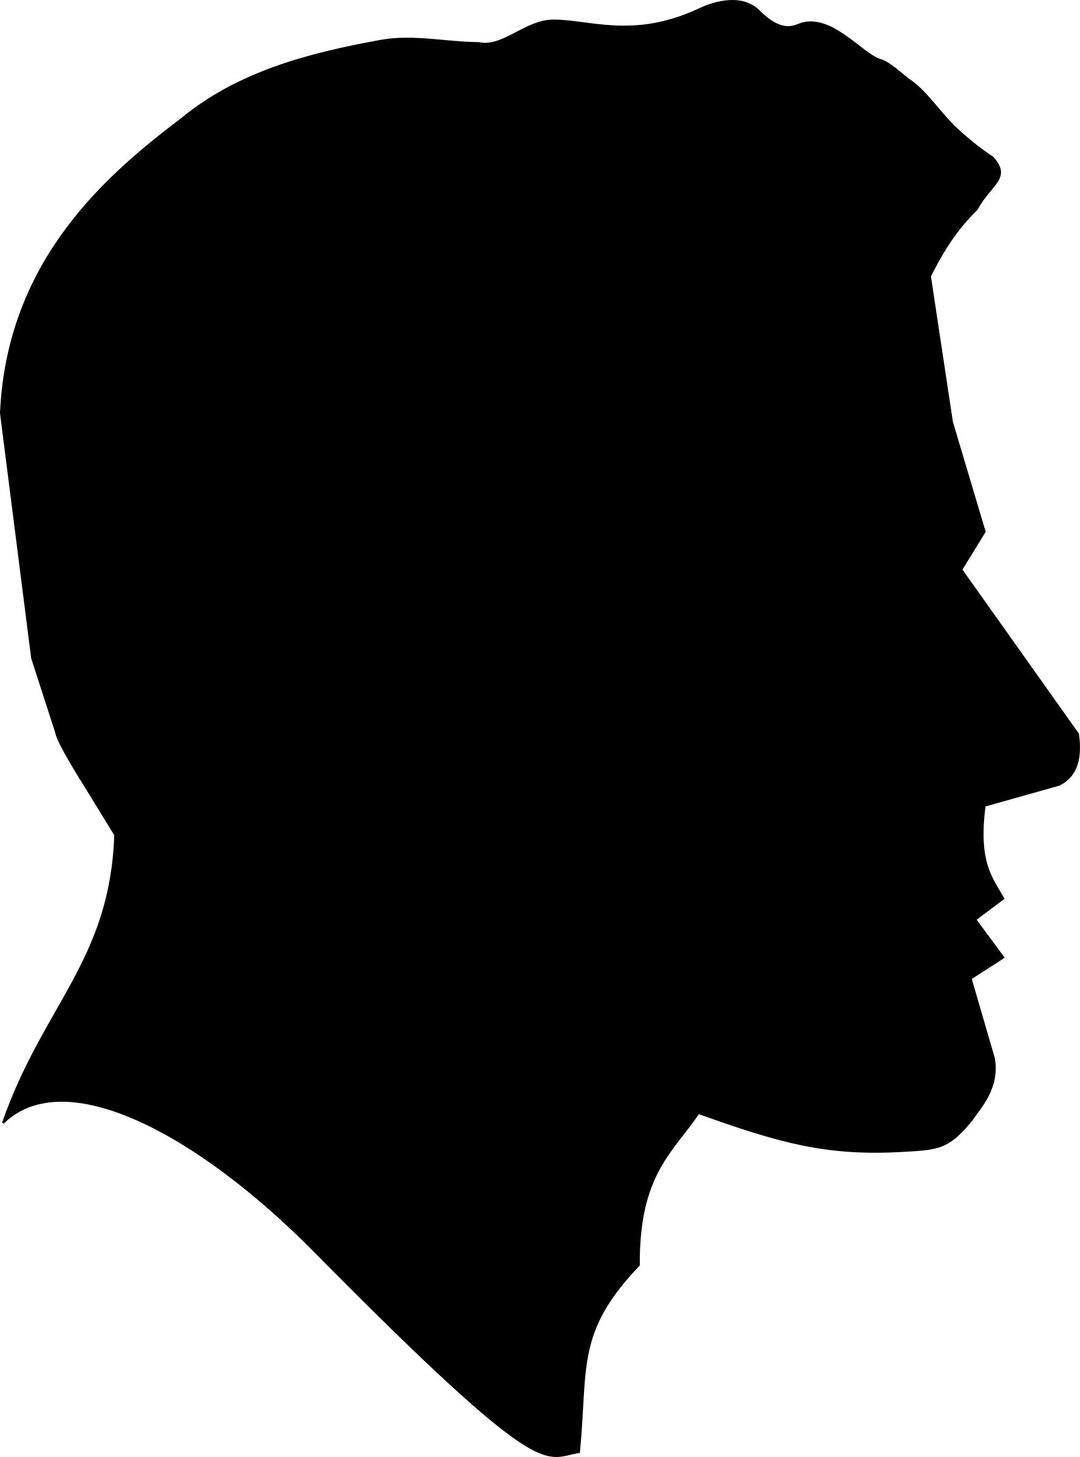 Male Profile Silhouette png transparent